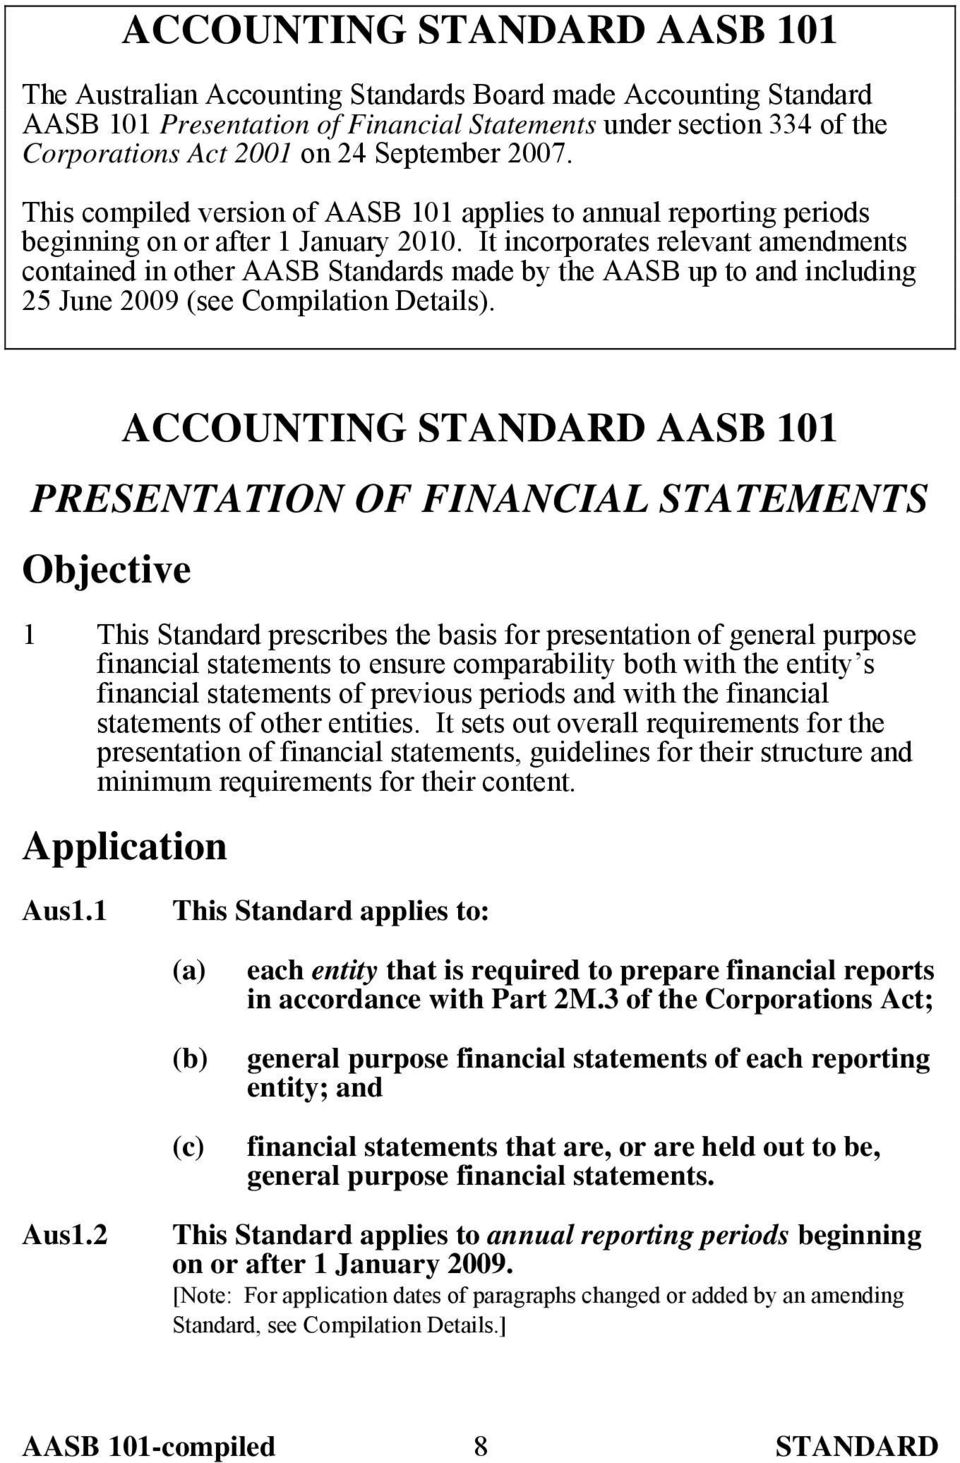 It incorporates relevant amendments contained in other AASB Standards made by the AASB up to and including 25 June 2009 (see Compilation Details).